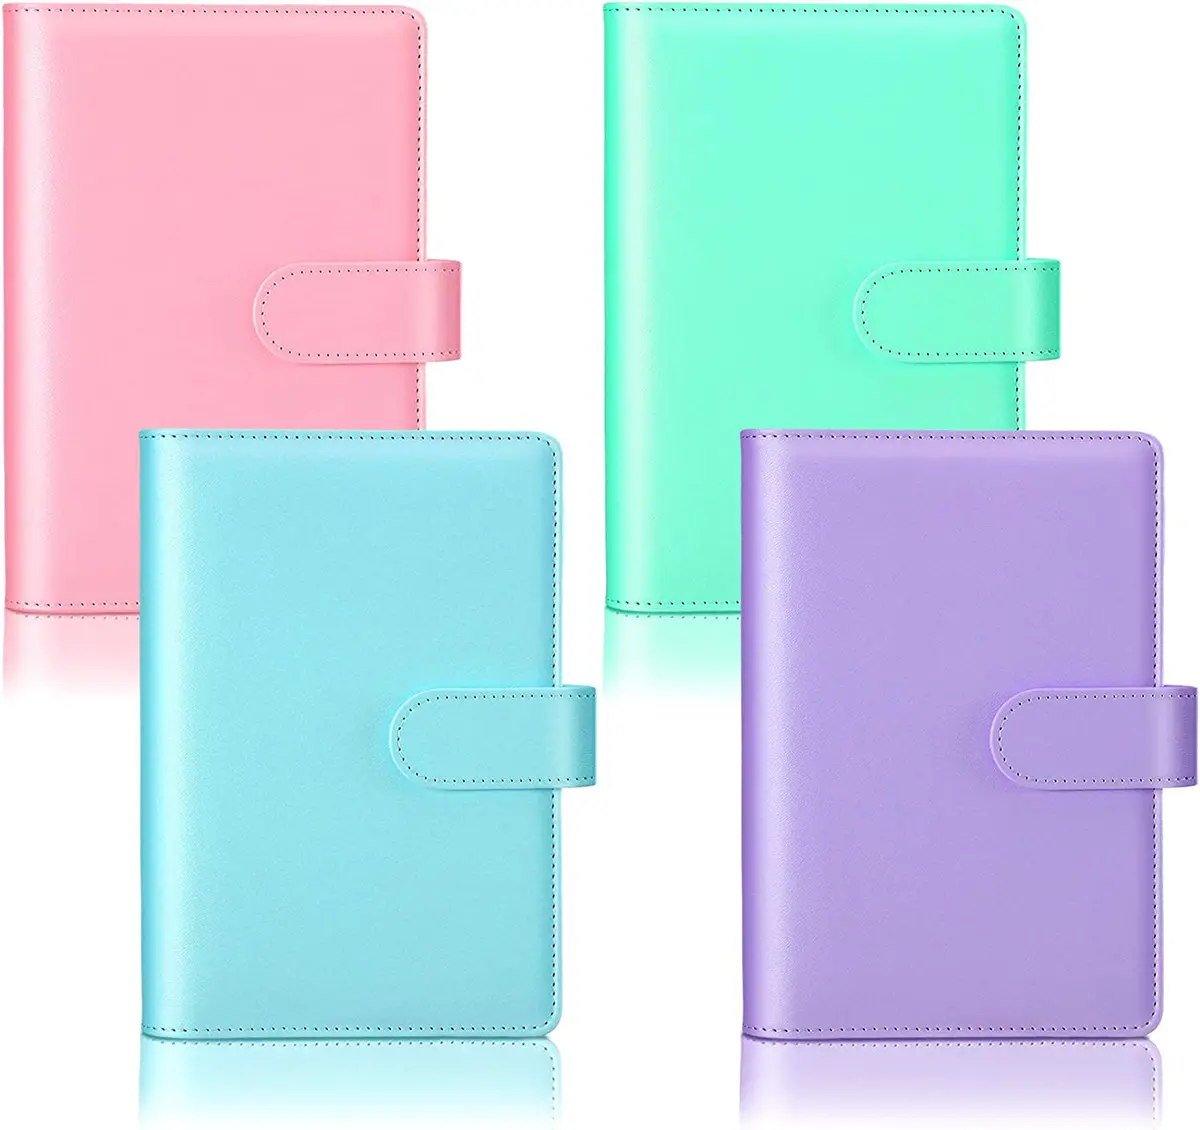 4 Pieces A6 PU Leather Notebook Binder A6 Binder Bulk 6 Ring Binder Cover  Small